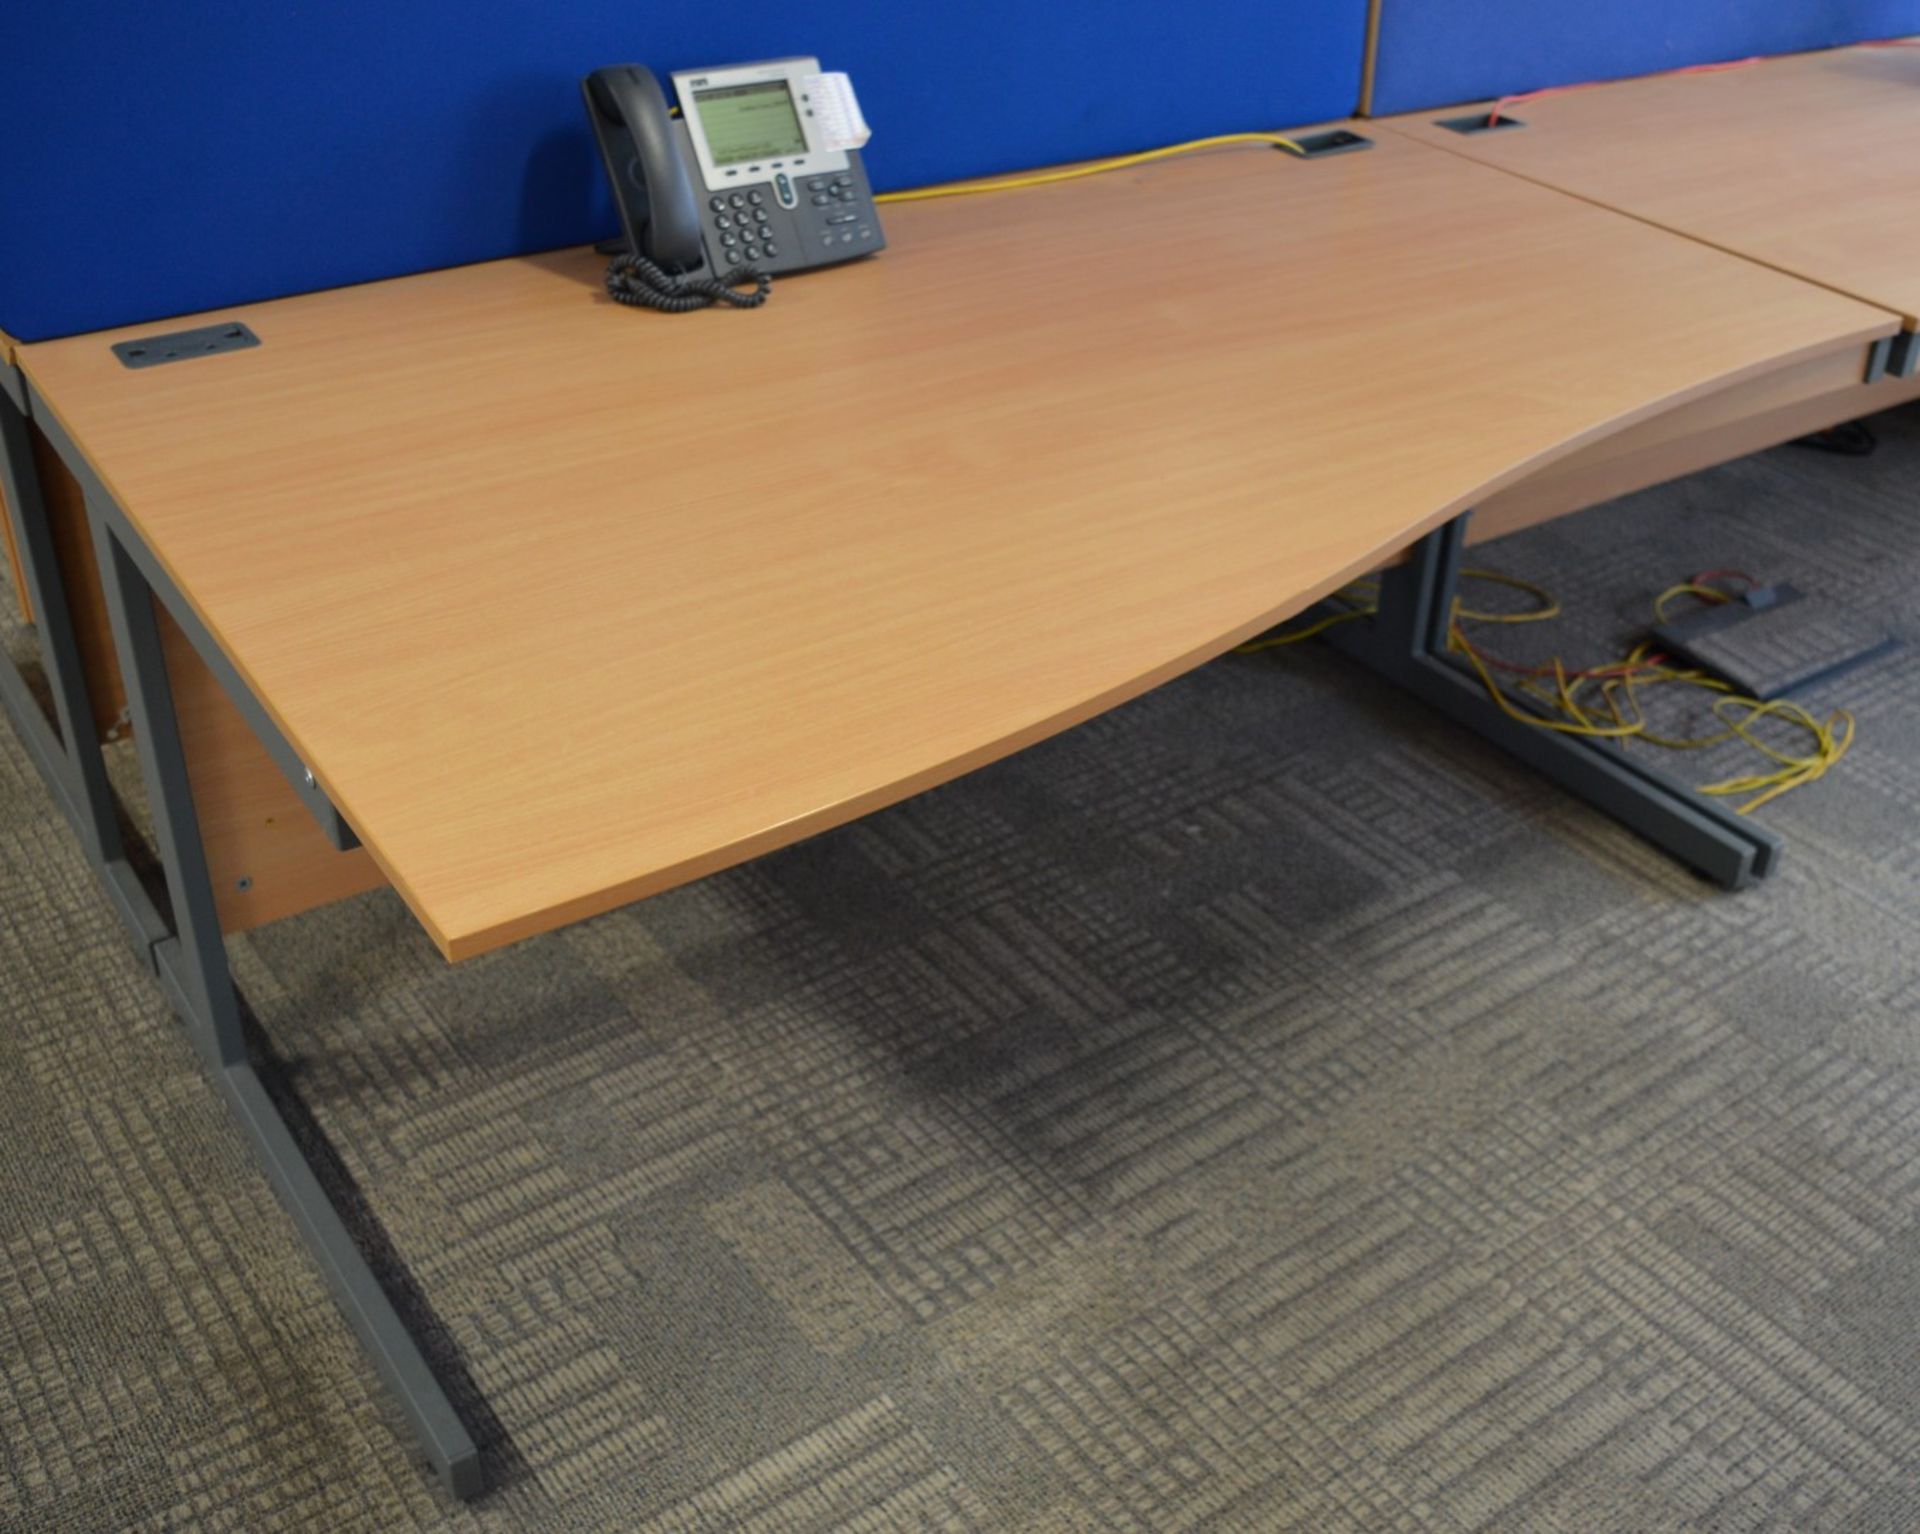 6 x Imperial Office Desks With Partition Dividers - Includes 3 Left Hand & 3 Right Hand Desks - - Image 2 of 8